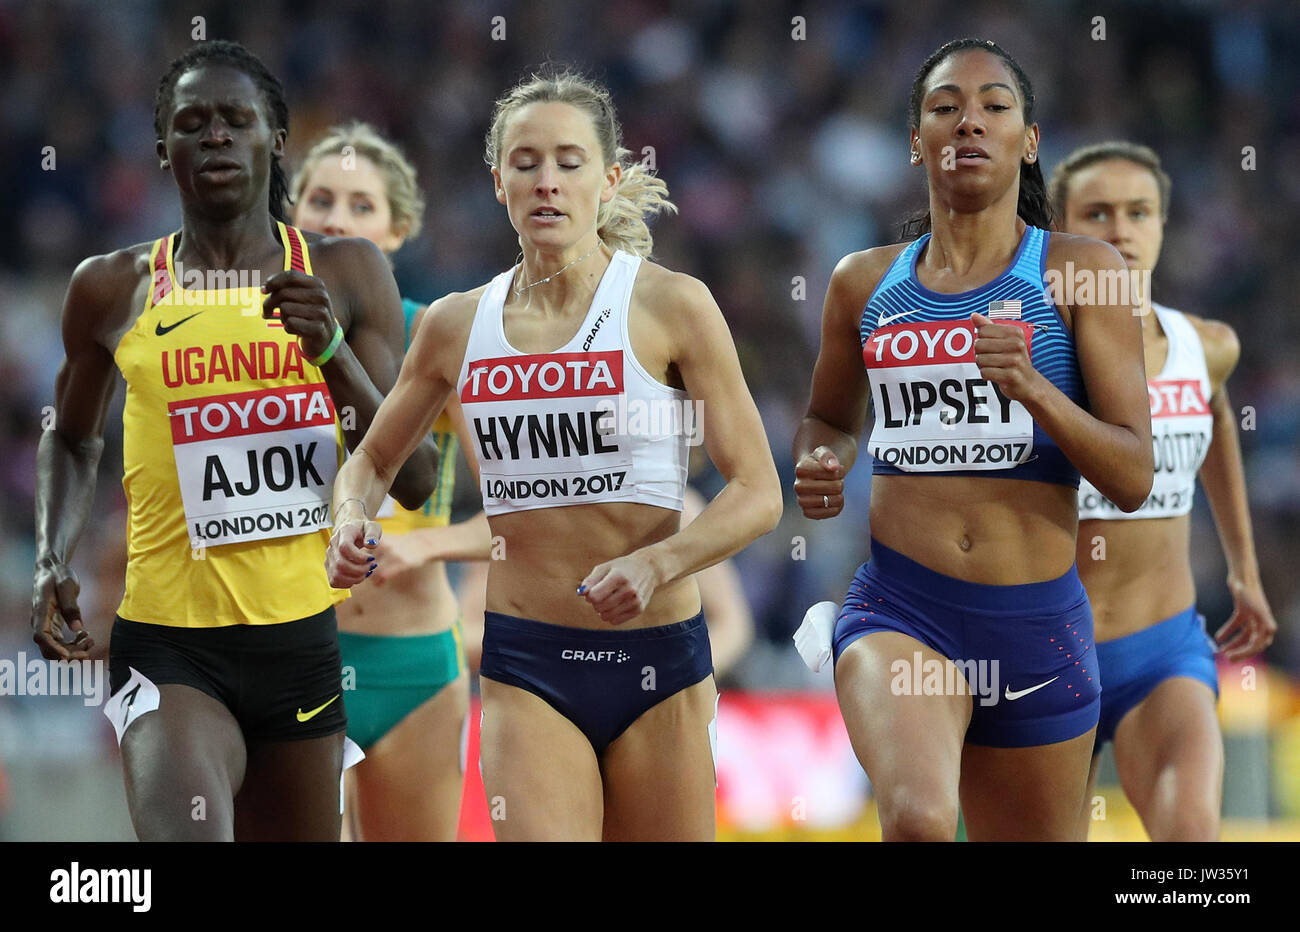 Uganda's Dorcus Ajok, Norway's Hedde Hynne and USA's Charlene Lipsey during day seven of the 2017 IAAF World Championships at the London Stadium. PRESS ASSOCIATION Photo. Picture date: Thursday August 10, 2017. See PA story Athletics World. Photo credit should read: Jonathan Brady/PA Wire. RESTRICTIONS: Editorial use only. No transmission of sound or moving images and no video simulation. Stock Photo